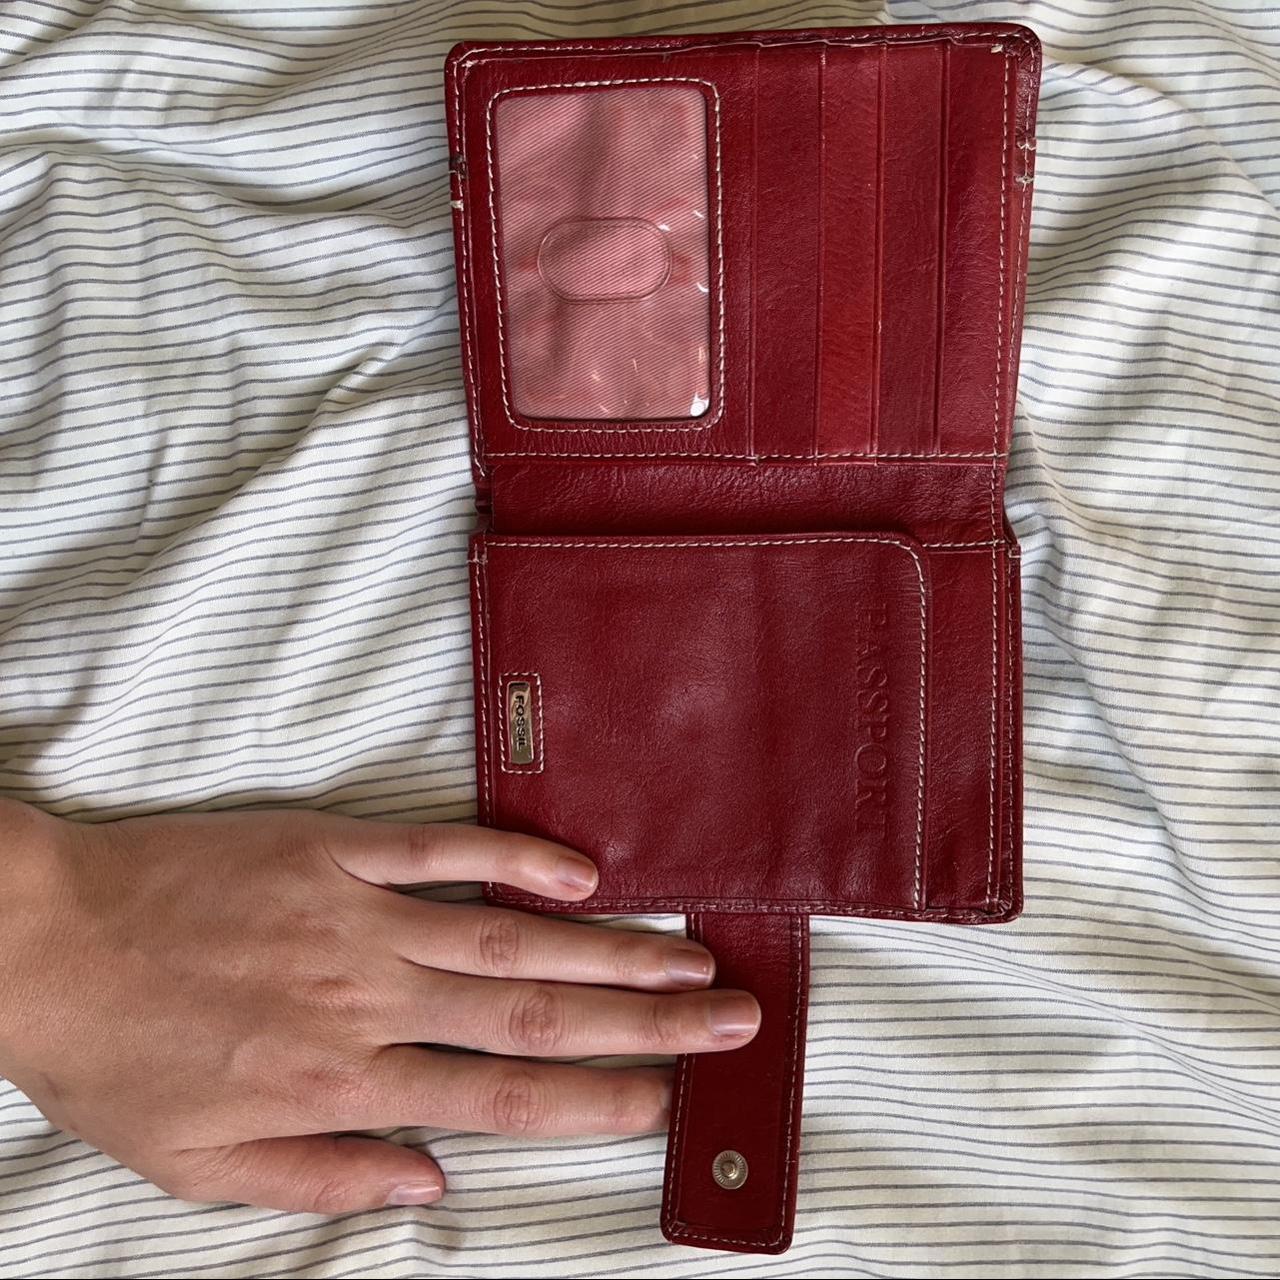 Fossil Women's Red and Burgundy Wallet-purses (3)